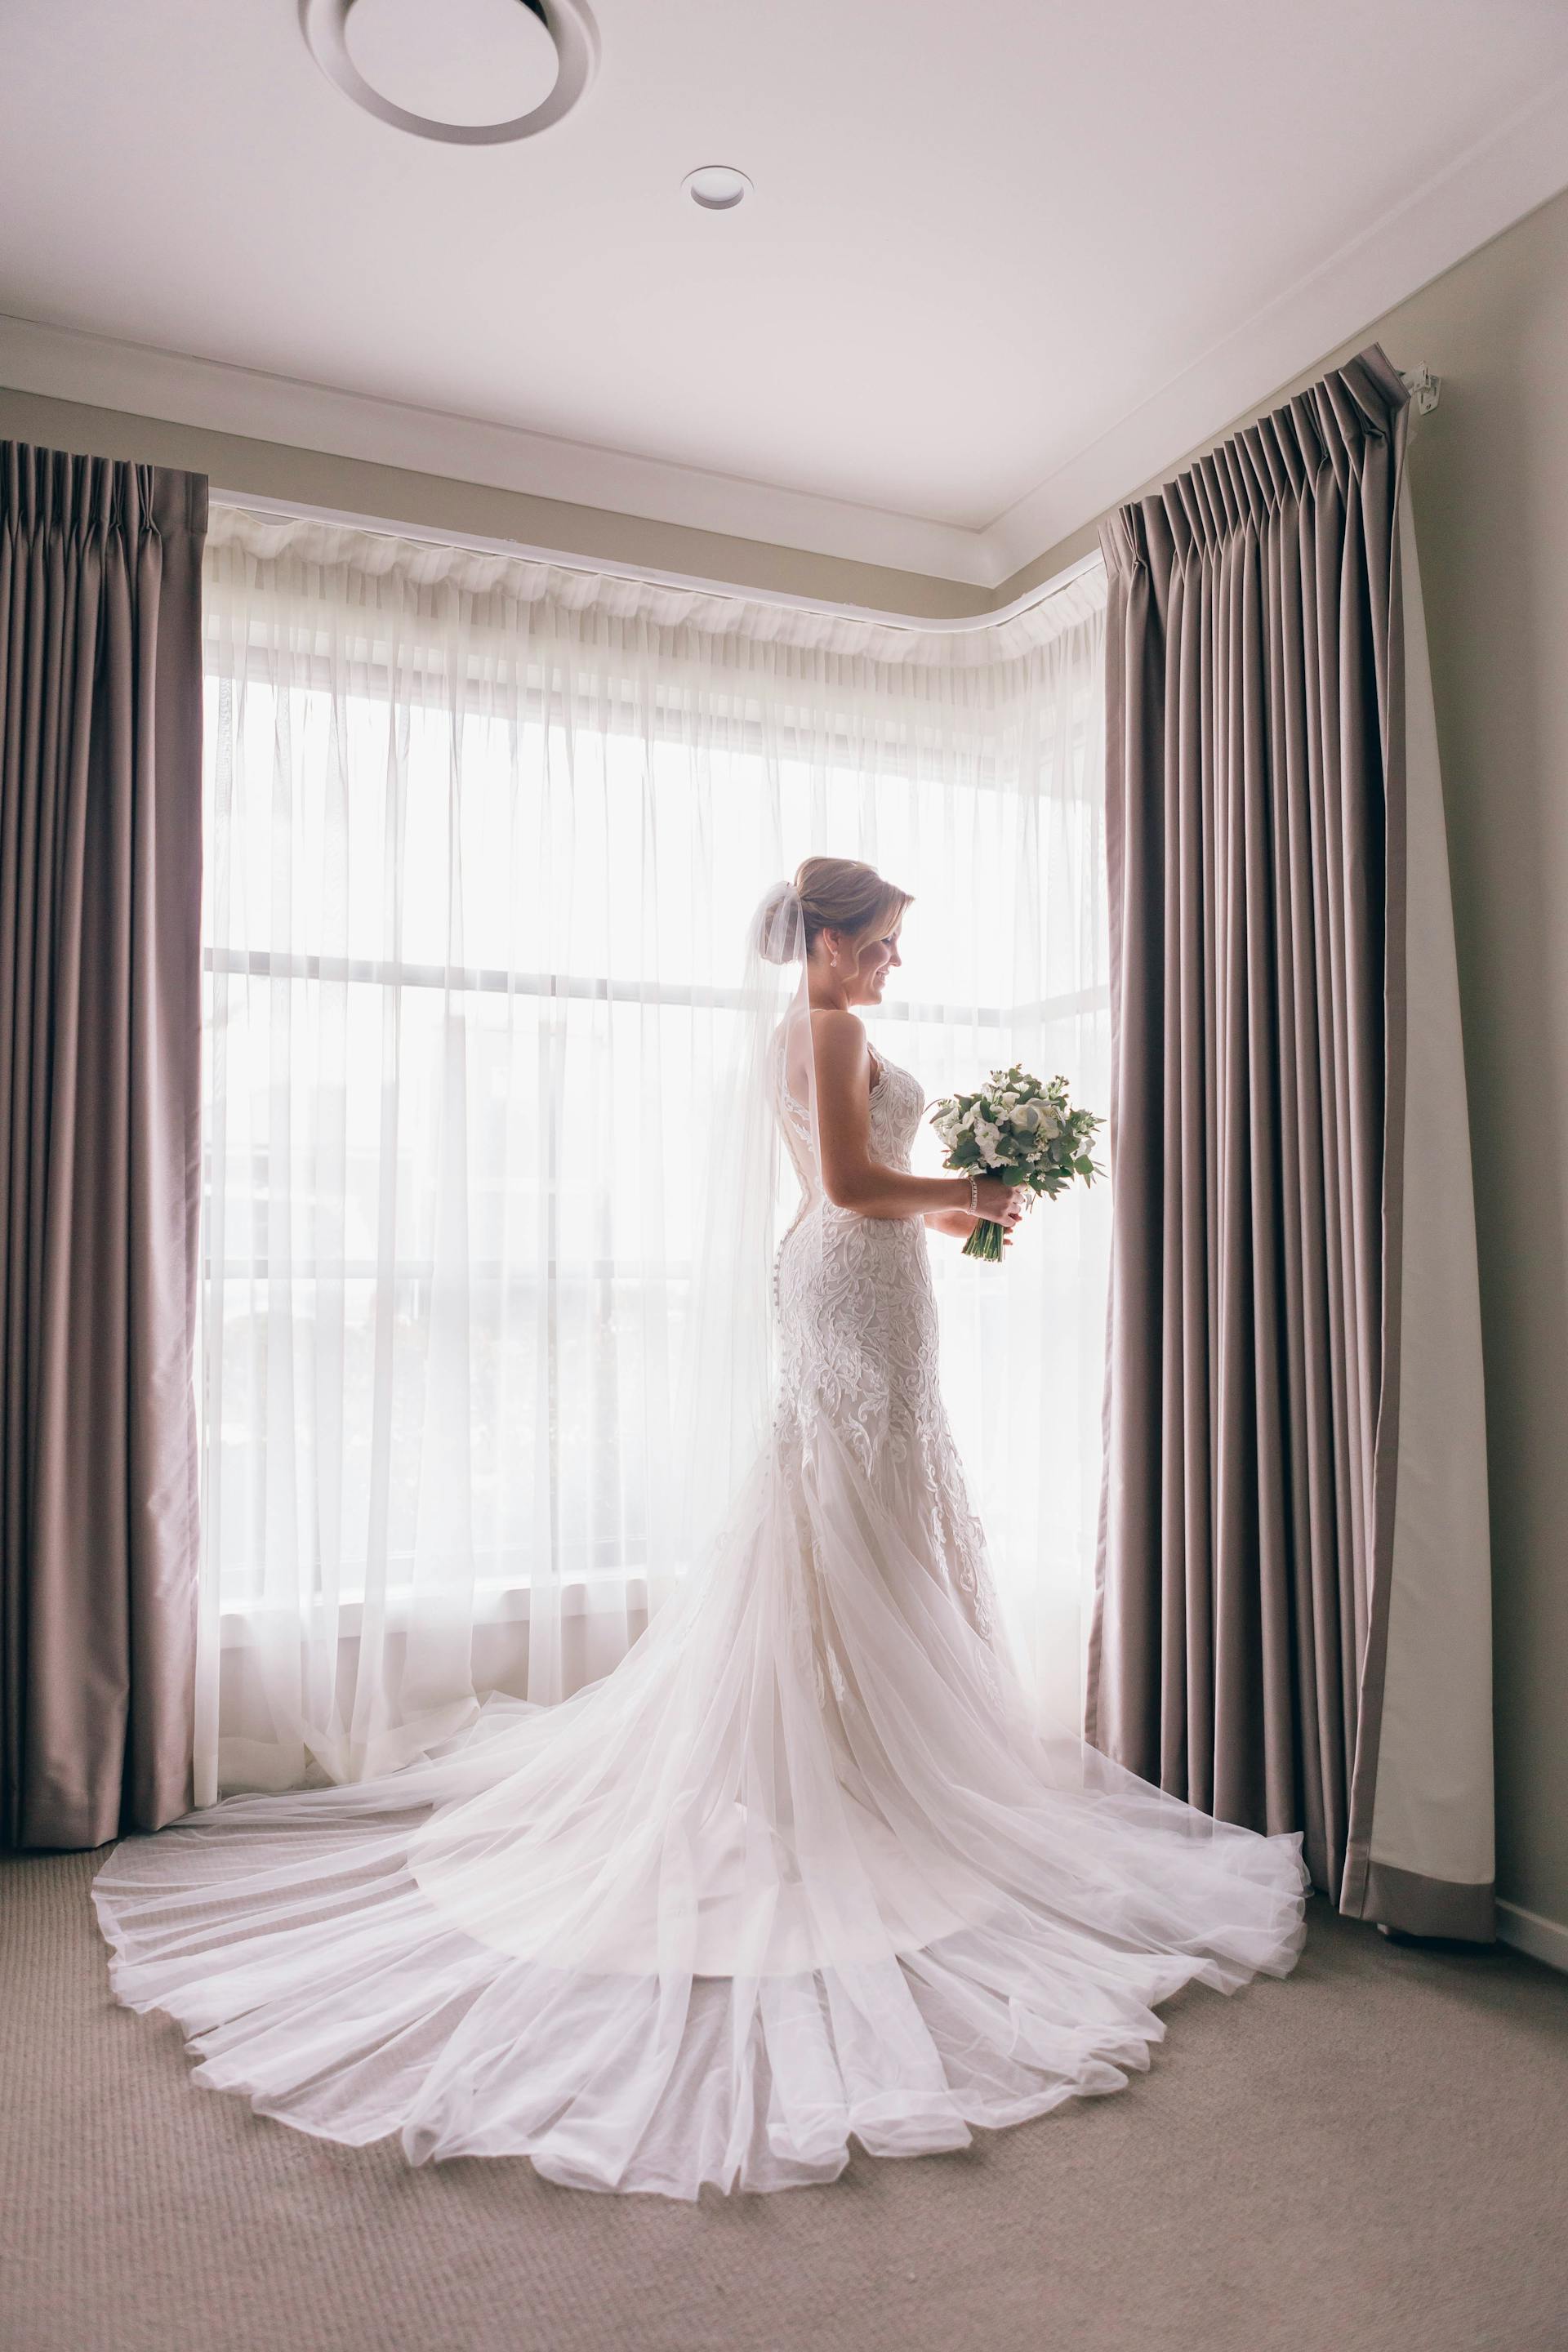 A bride in her wedding outfit | Source: Pexels